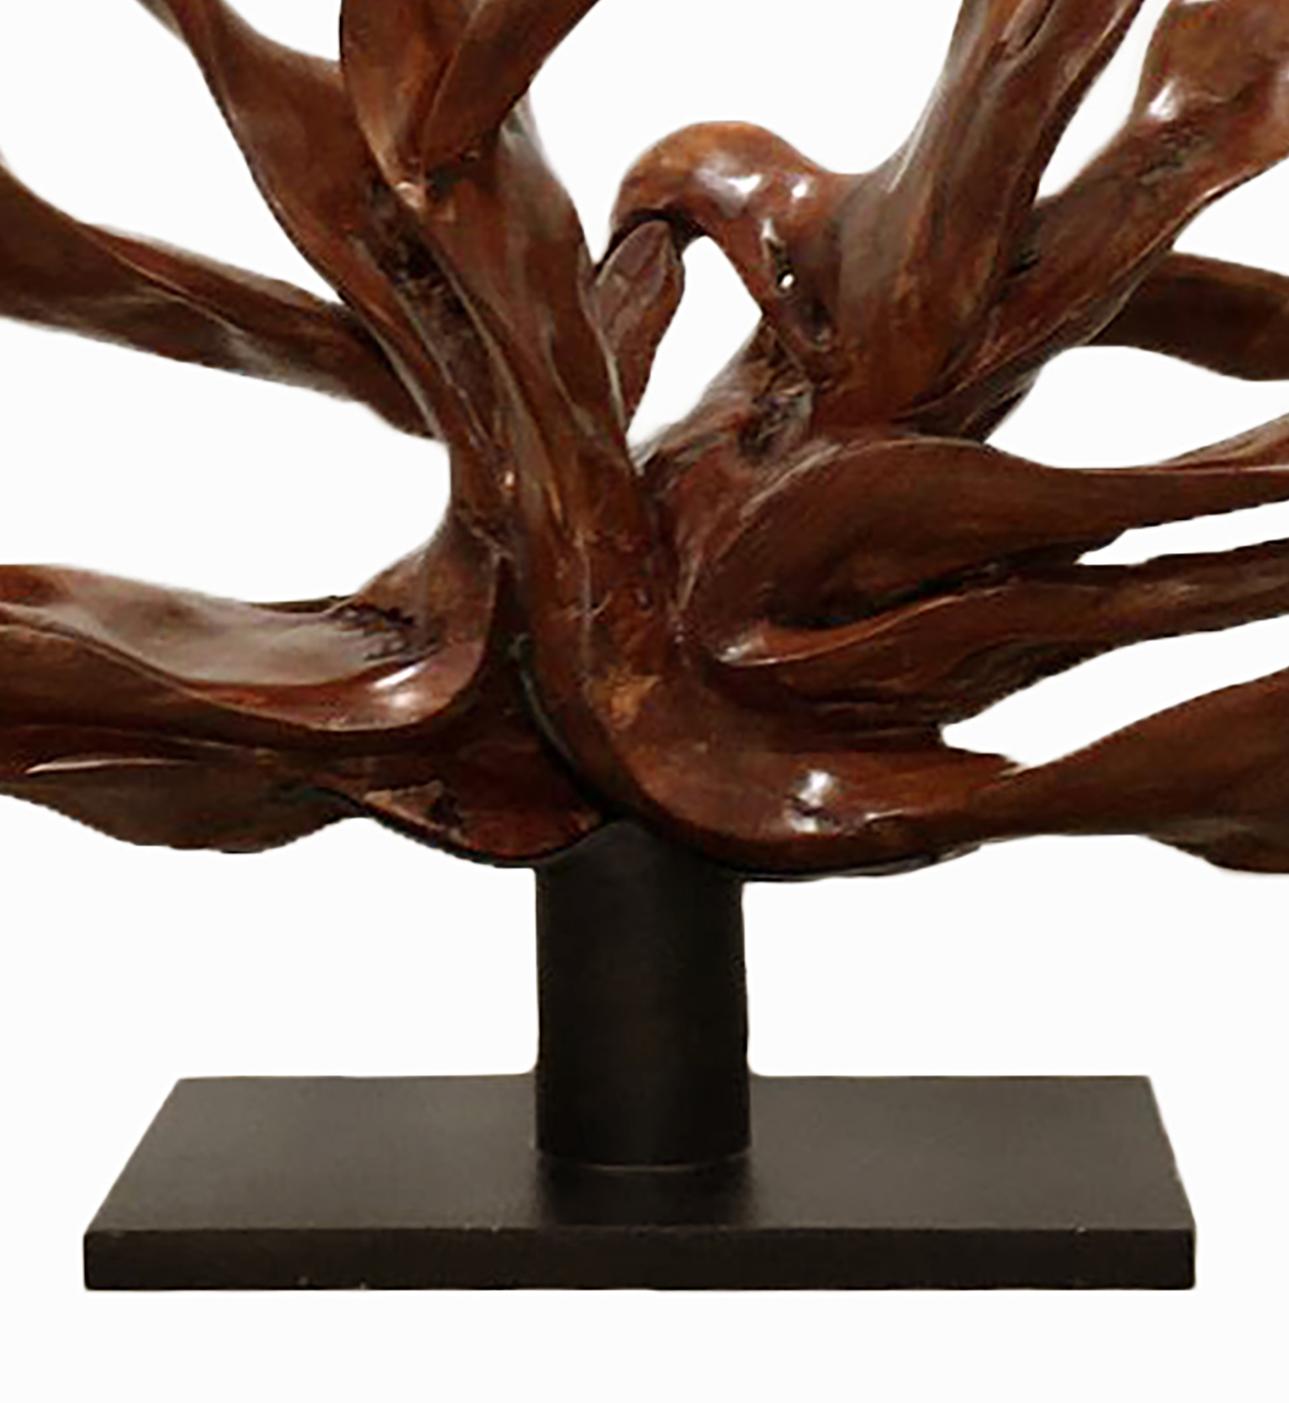 Radiance - 21st Century, Contemporary, Abstract Sculpture, Lychee Wood, Roots 5